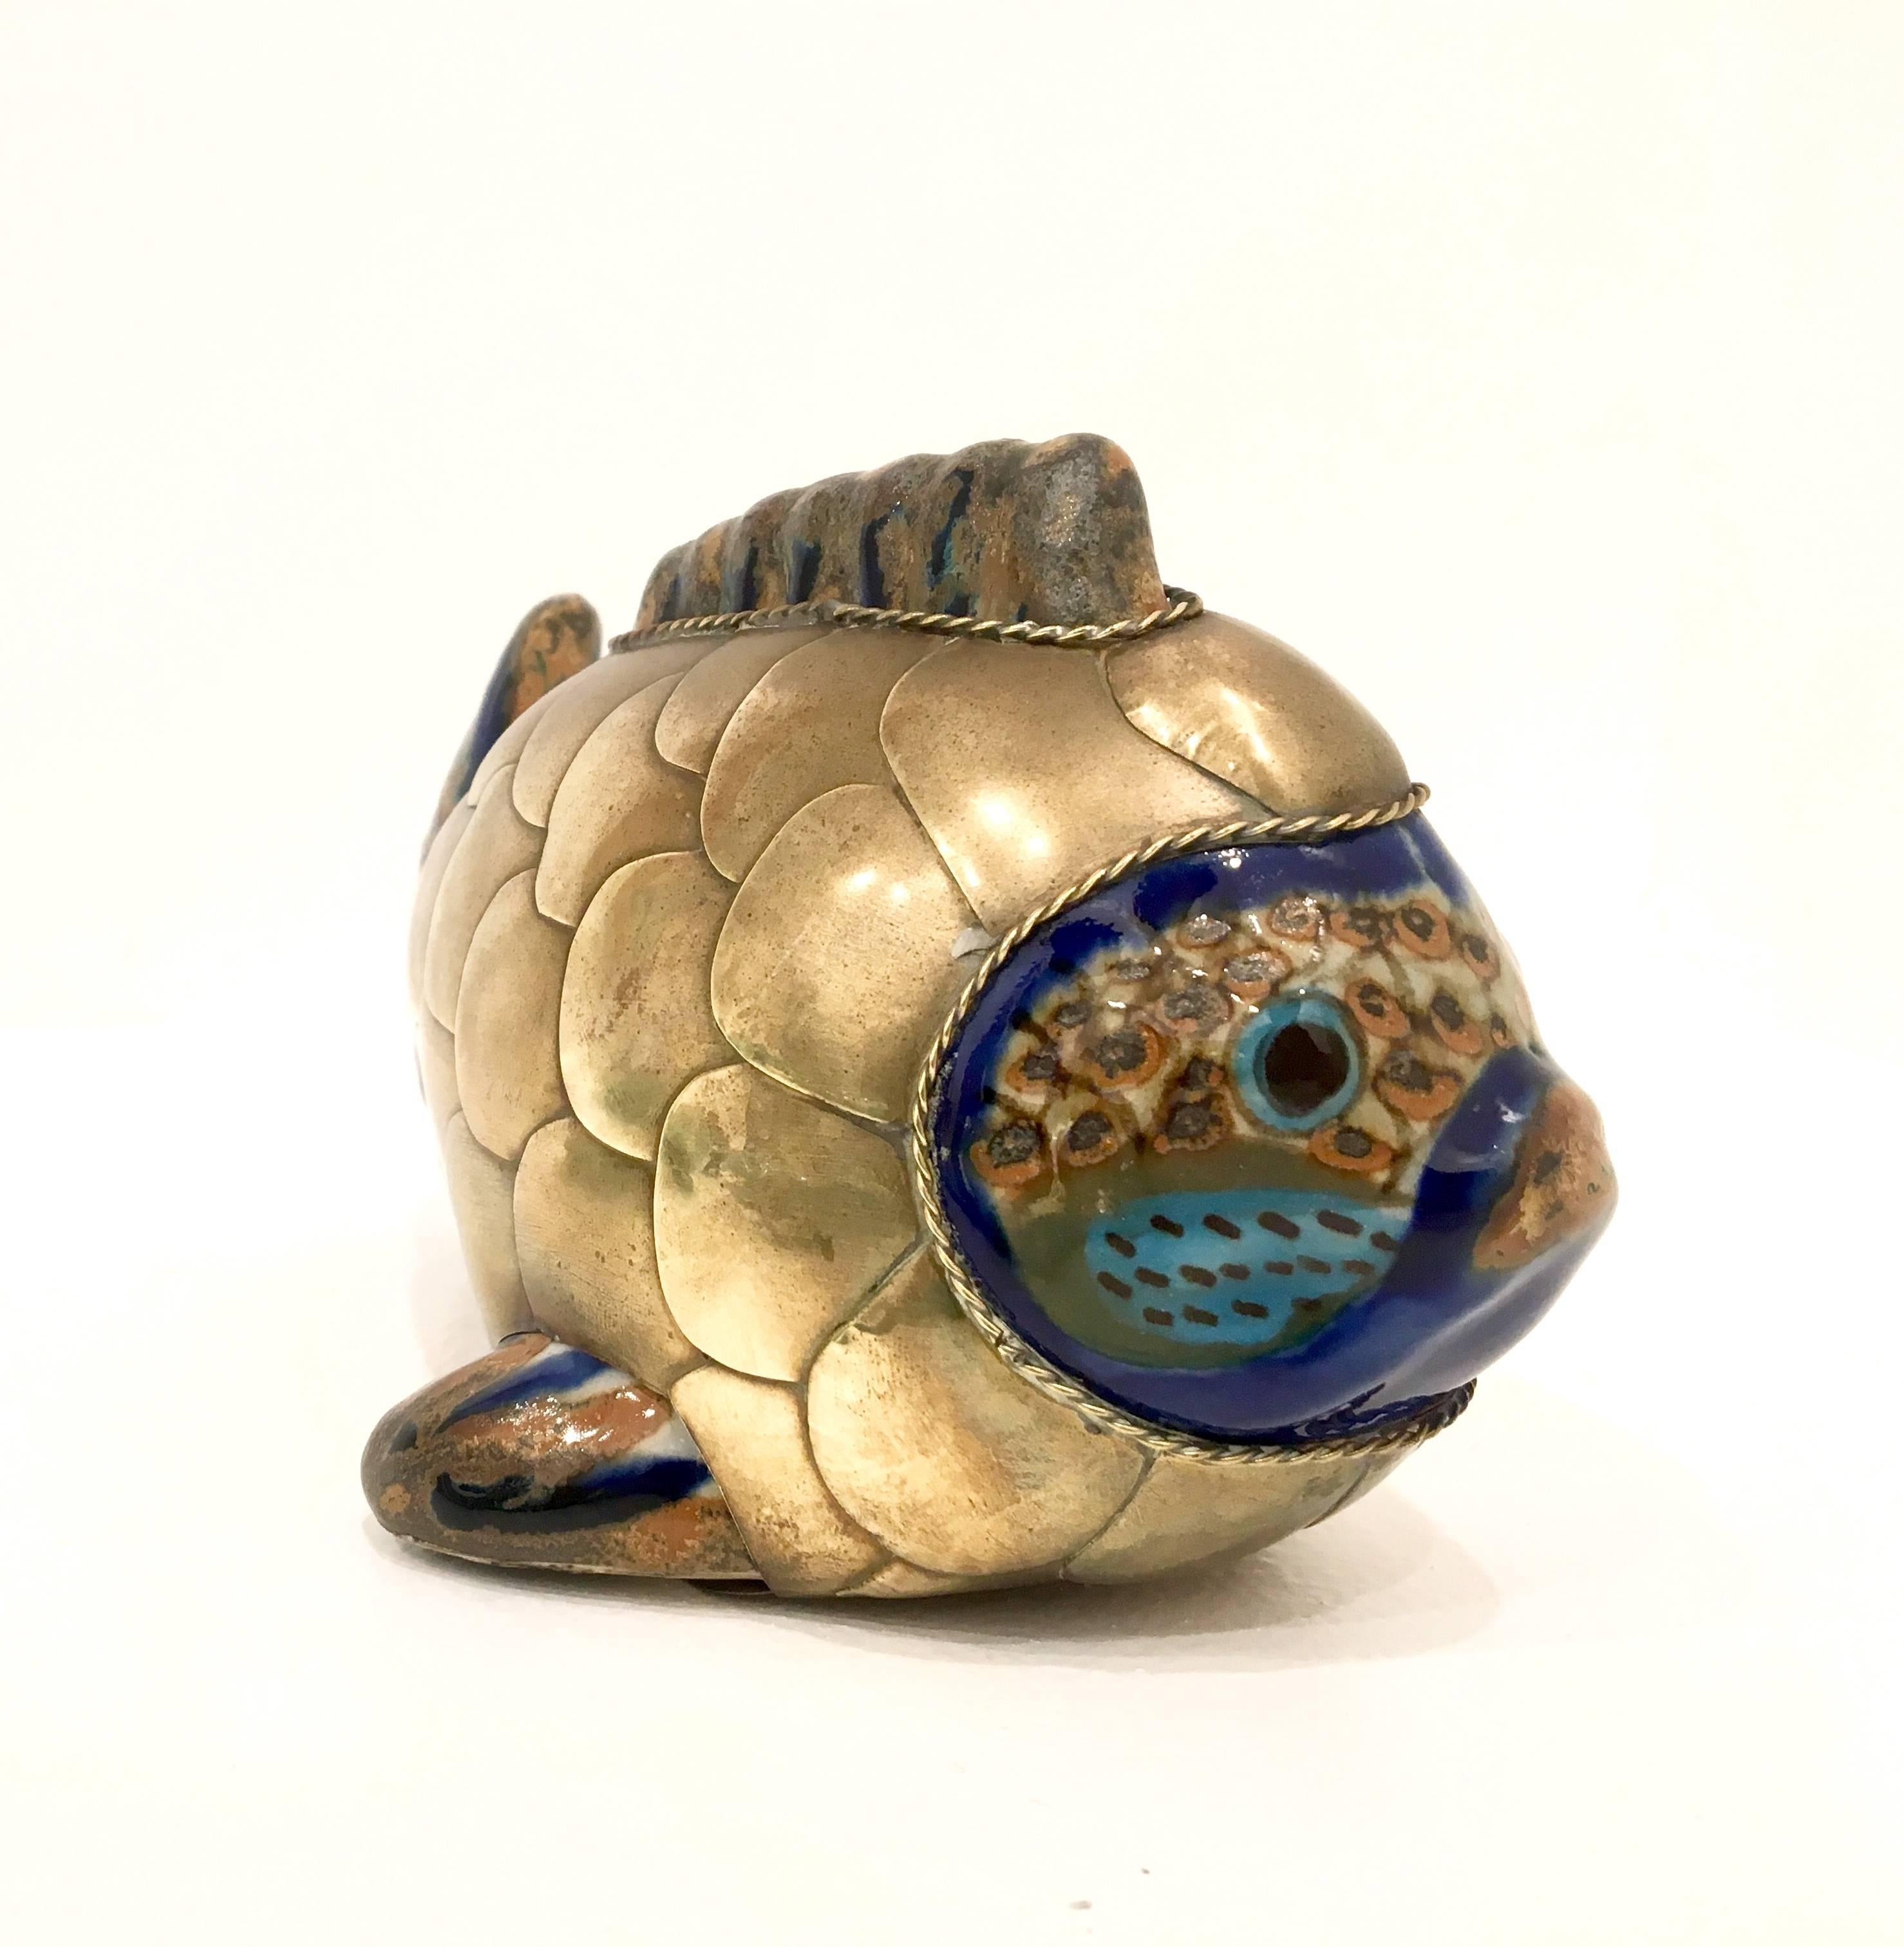 Hollywood Regency Petite Fish Sculpture in Brass and Ceramic Attributed to Sergio Bustamante